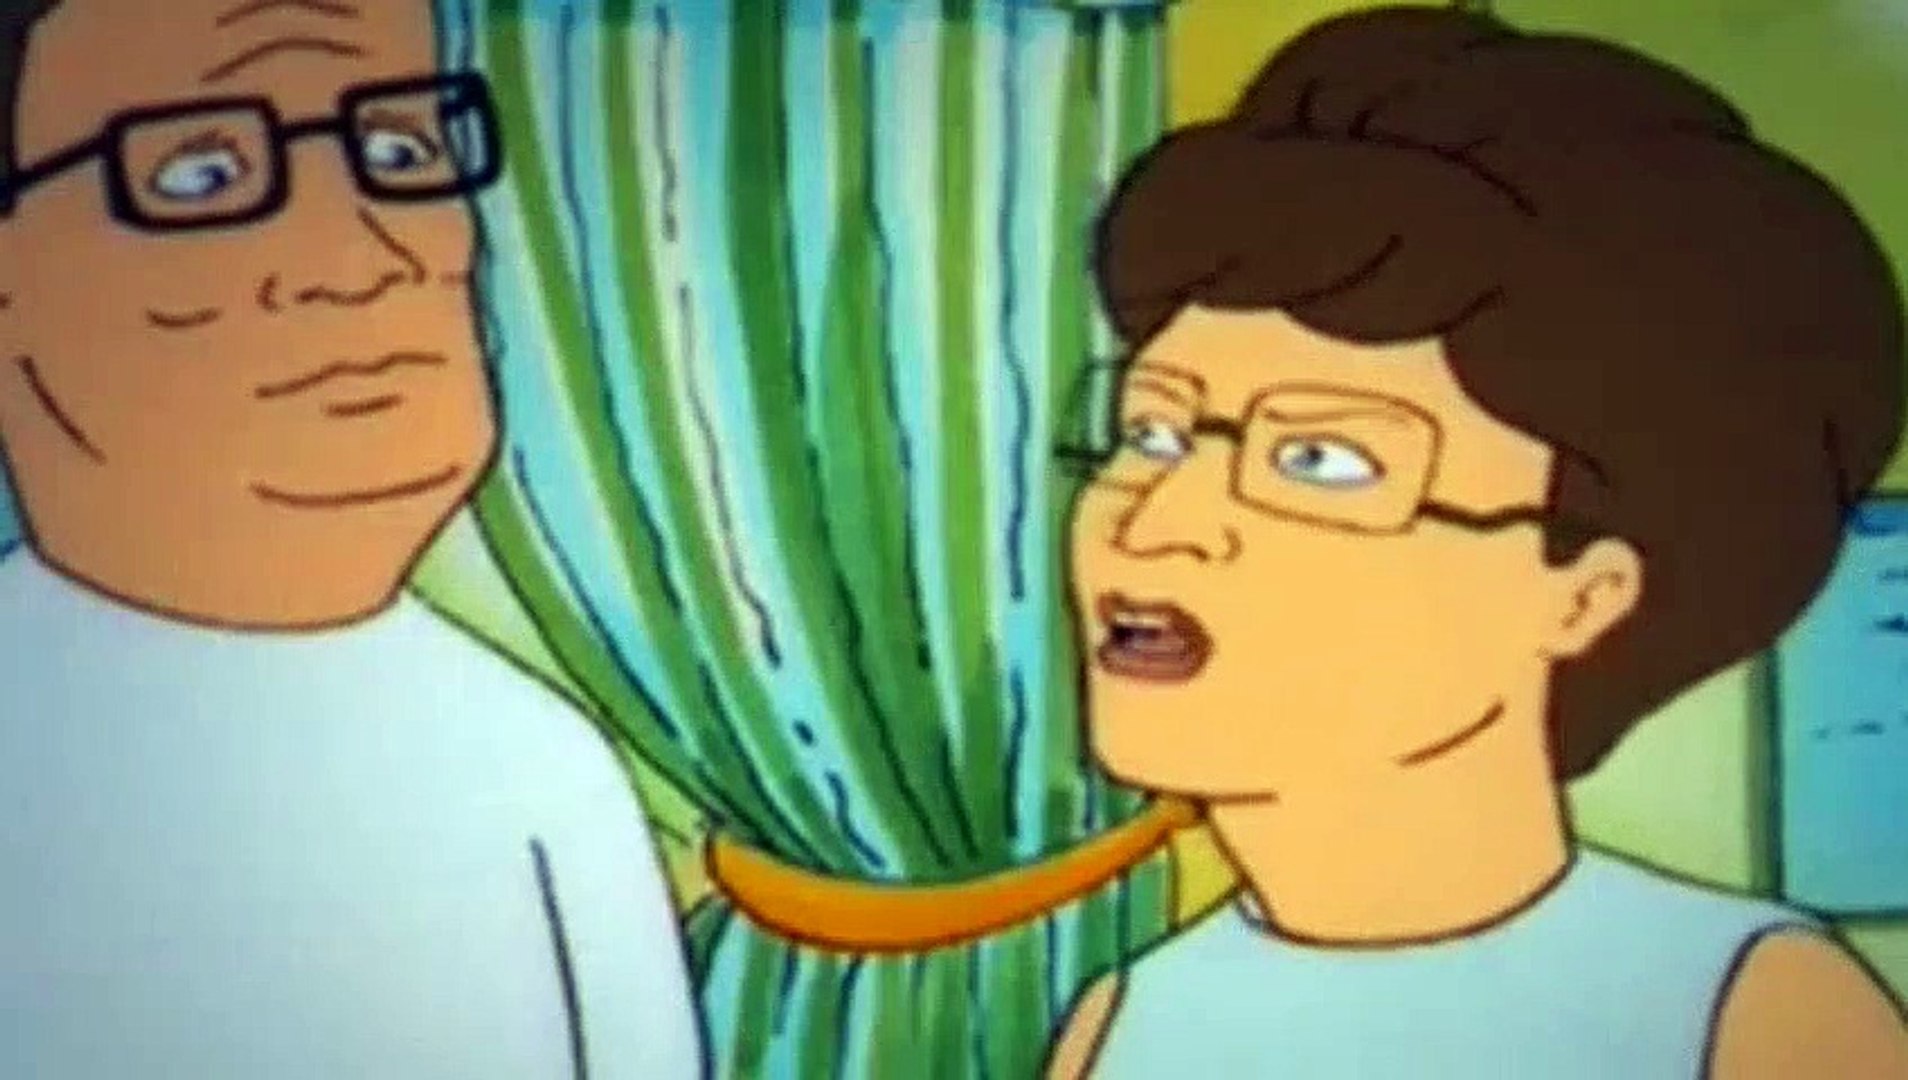 King of the Hill S4 - 14 - High Anxiety (Part 2) - video Dailymotion